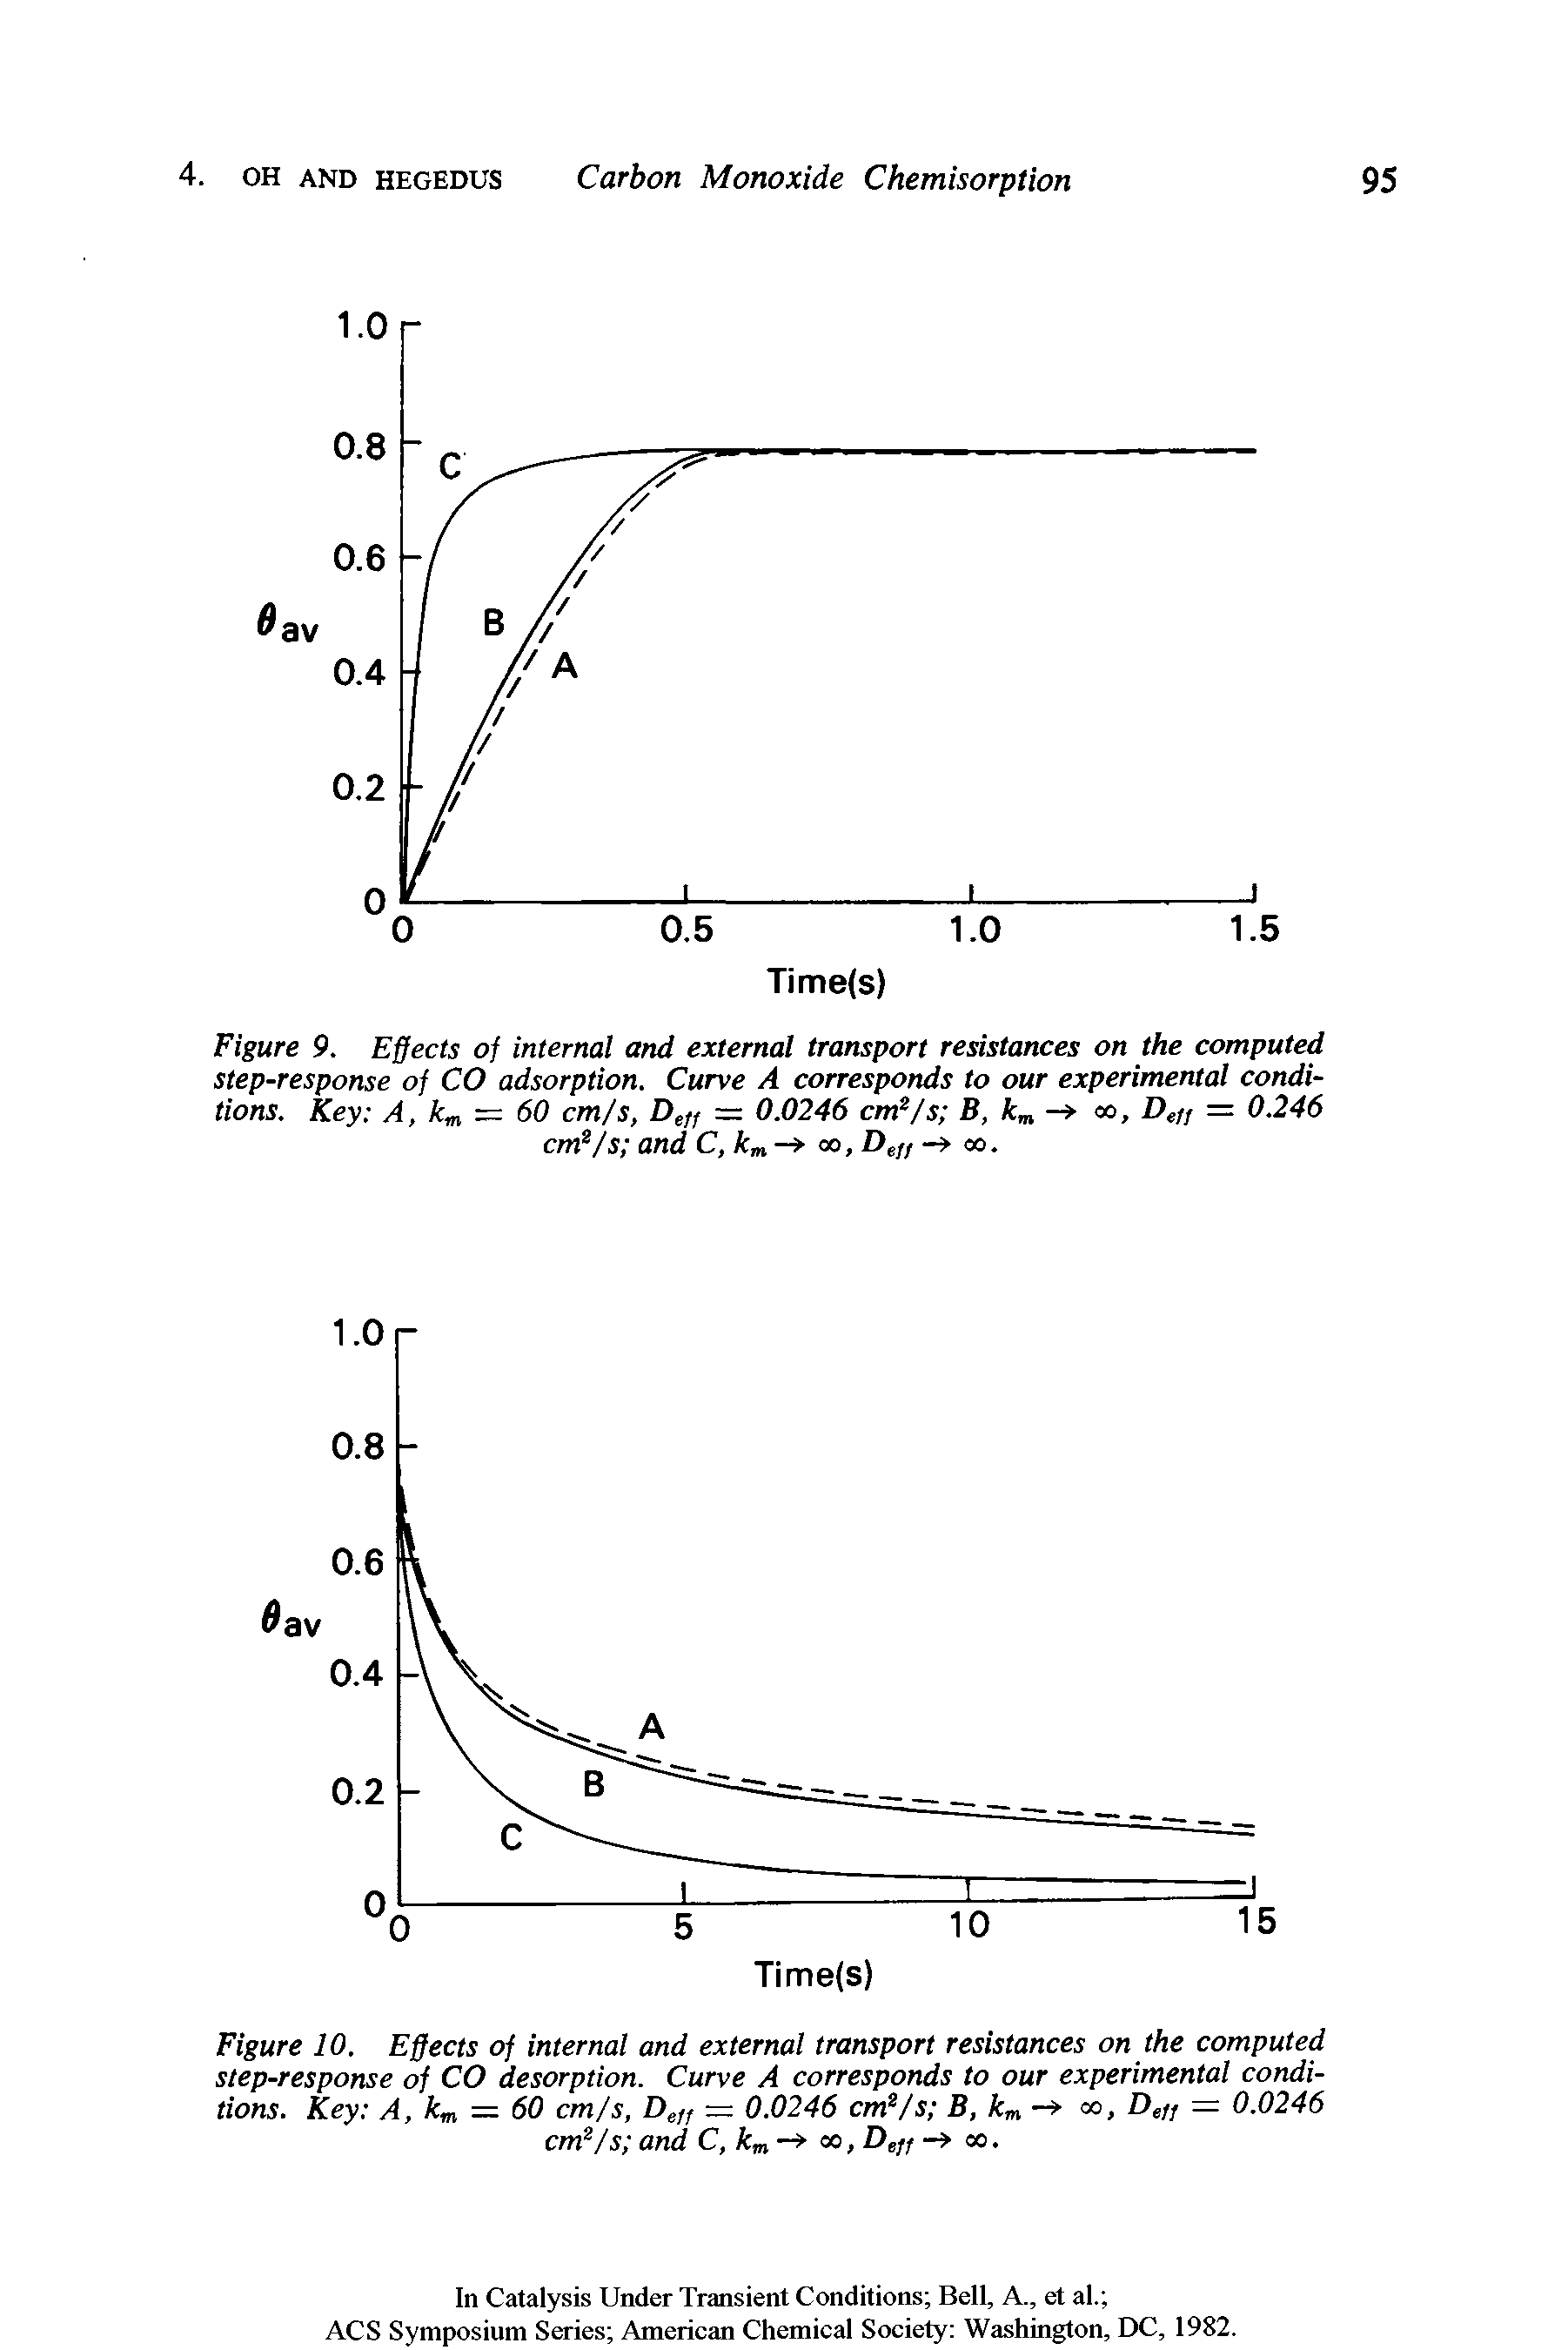 Figure 9. Effects of internal and external transport resistances on the computed step-response of CO adsorption. Curve A corresponds to our experimental conditions. Key A, km = 60 cm/s, Deff = 0.0246 cm2/s B, km —r oo, Detl = 0.246 cms/s and C, km — oo, Dell oo.